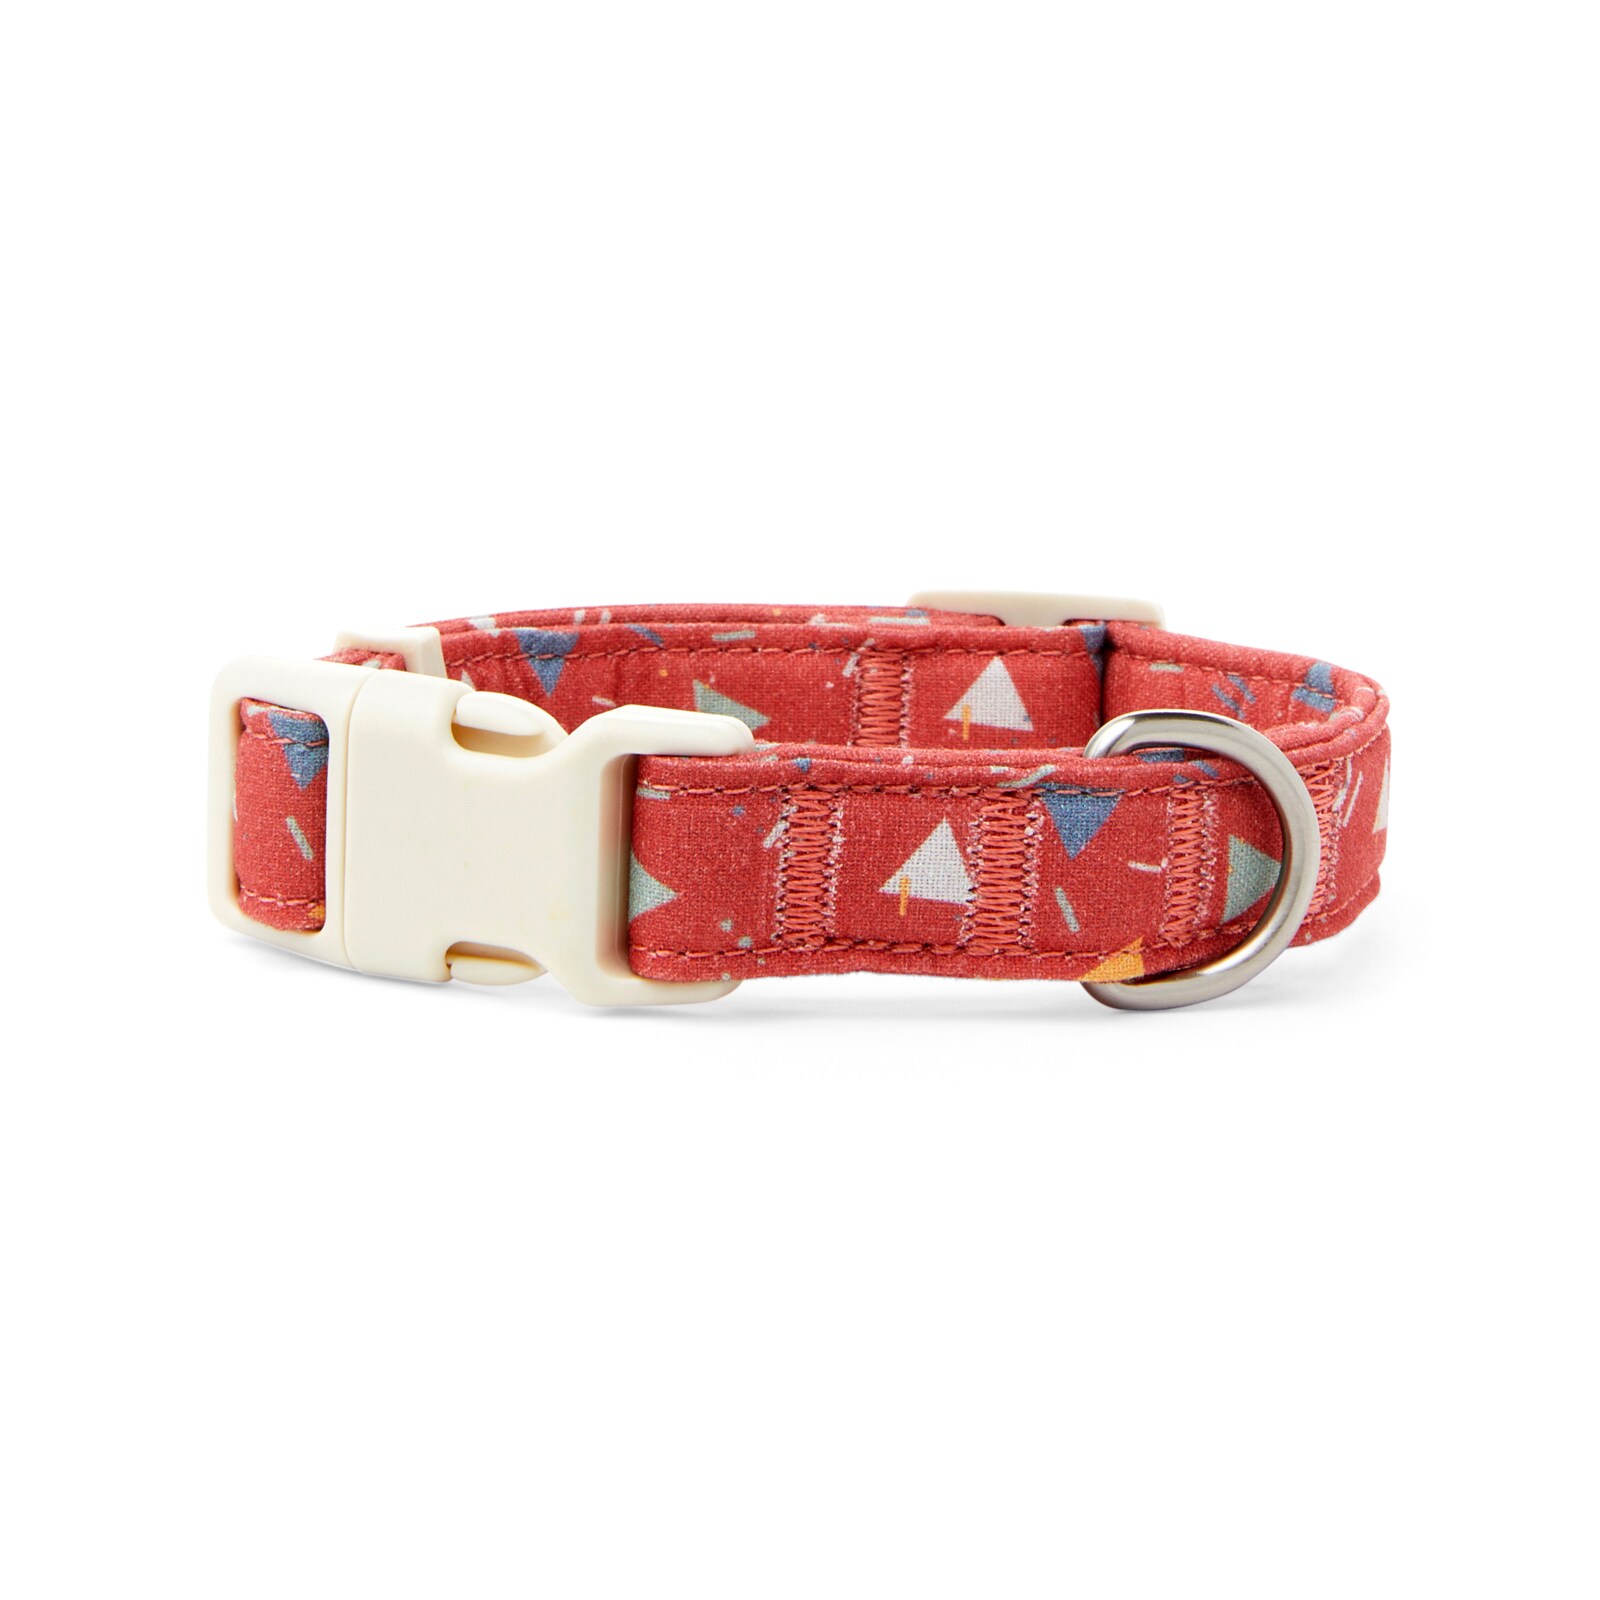 Mix,match,save Quality Ancol cat collars:Camouflage,Reflective or Soft weave 